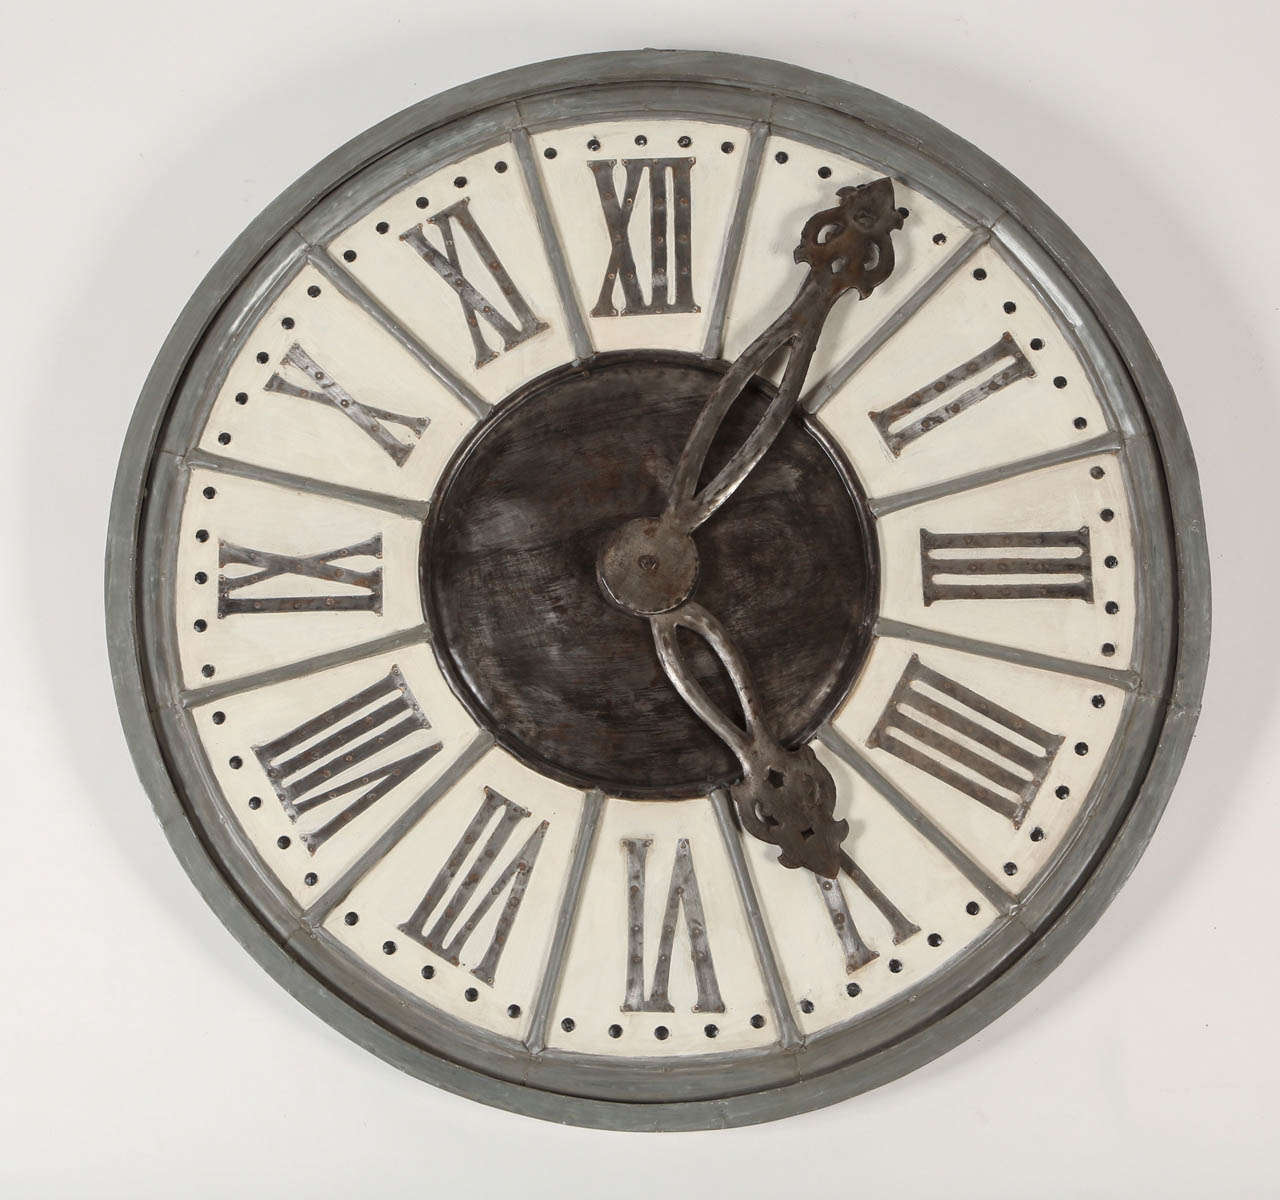 This large wall clock has a classic look with Roman numerals and large ornamental iron hands. It has an intentional patina which makes it feel like it came out of a grand old home. 
This would be a striking statement in a living room or an